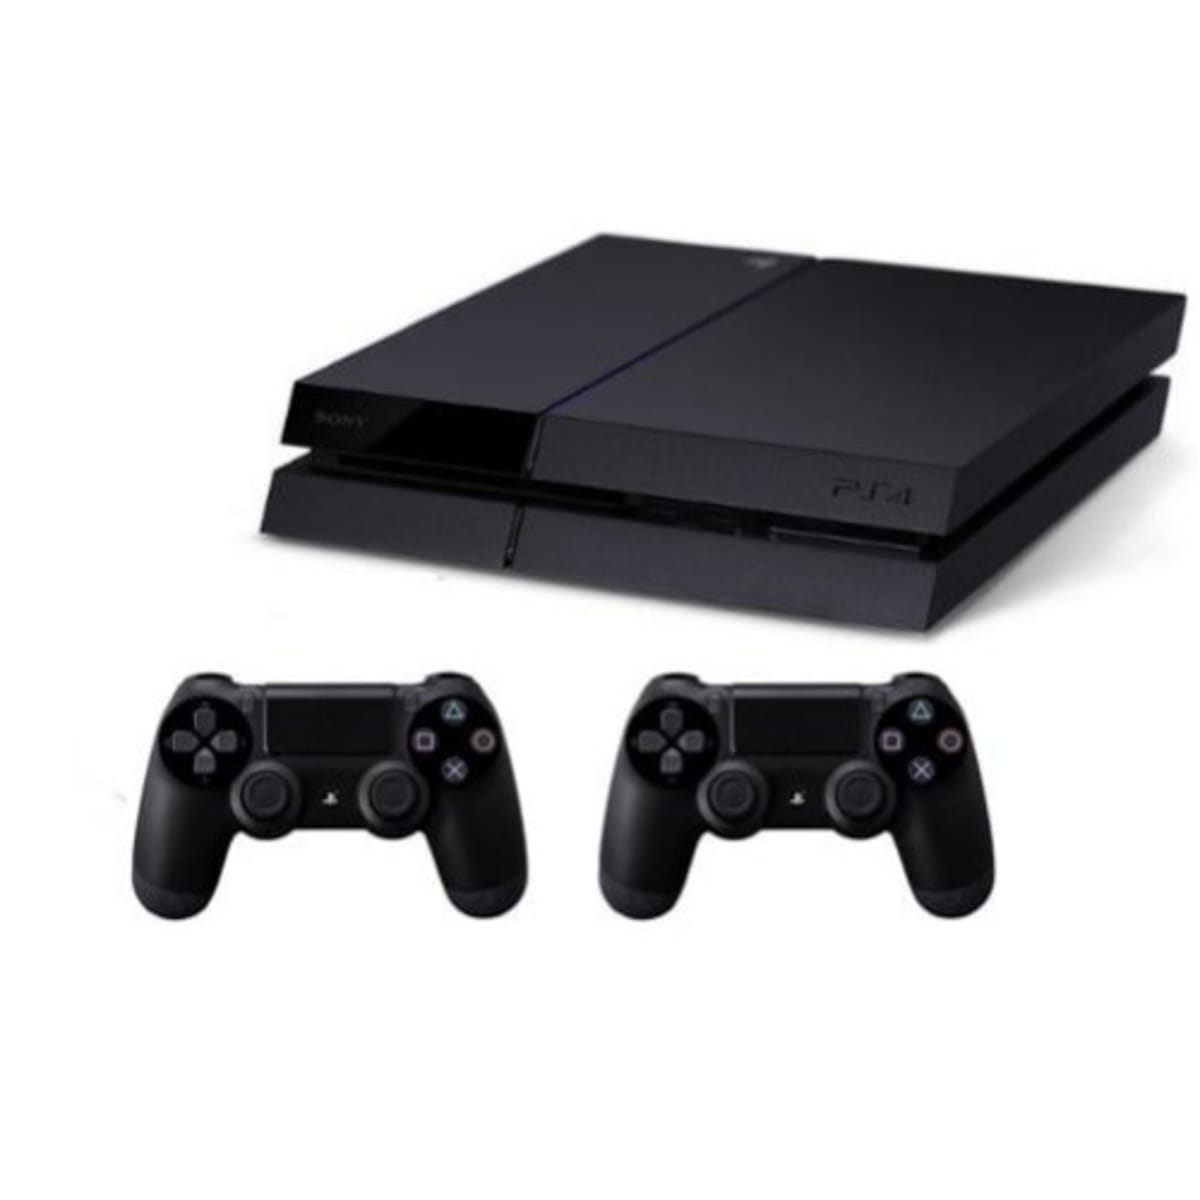 Sony Playstation 4 Console 500GB With 2 Dualshock Controllers